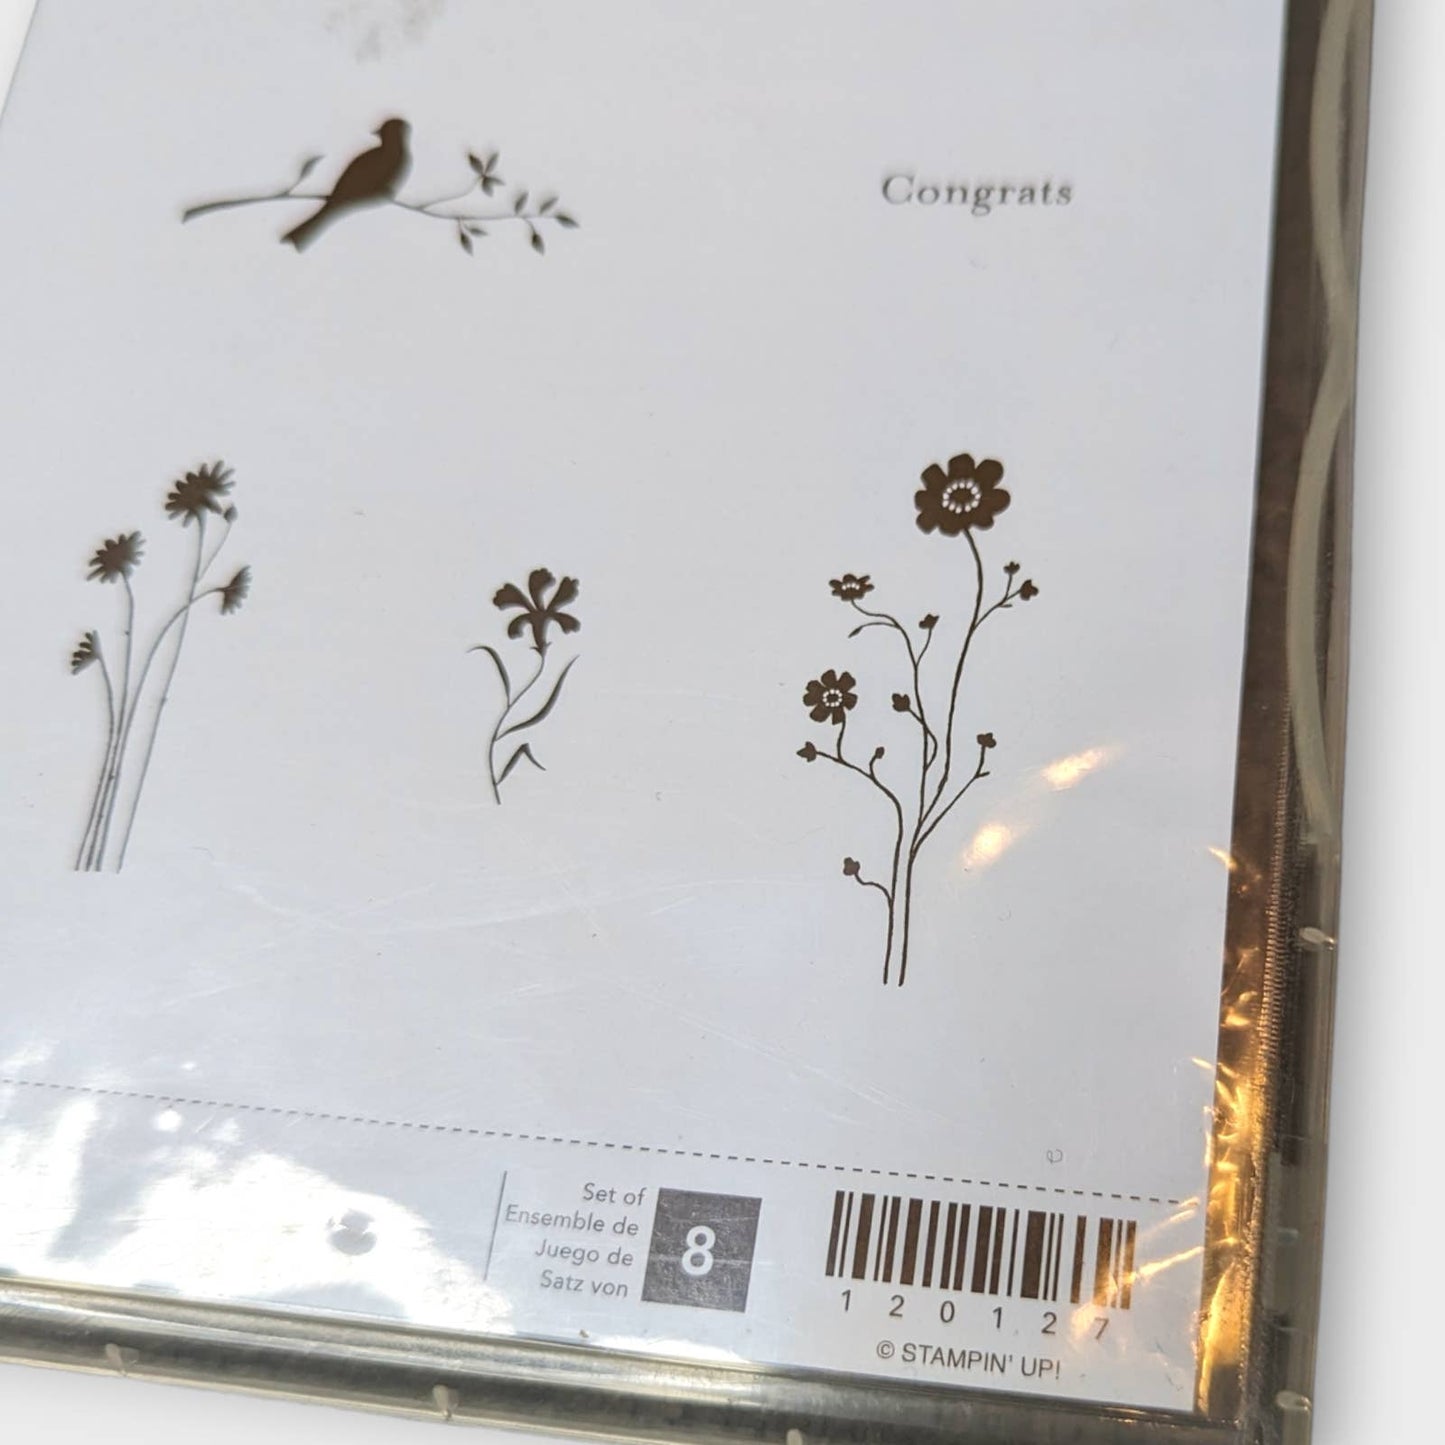 STAMPIN' UP! Silhouette Sentiments Rubber Stamps Floral Bird Crafts Cards NEW